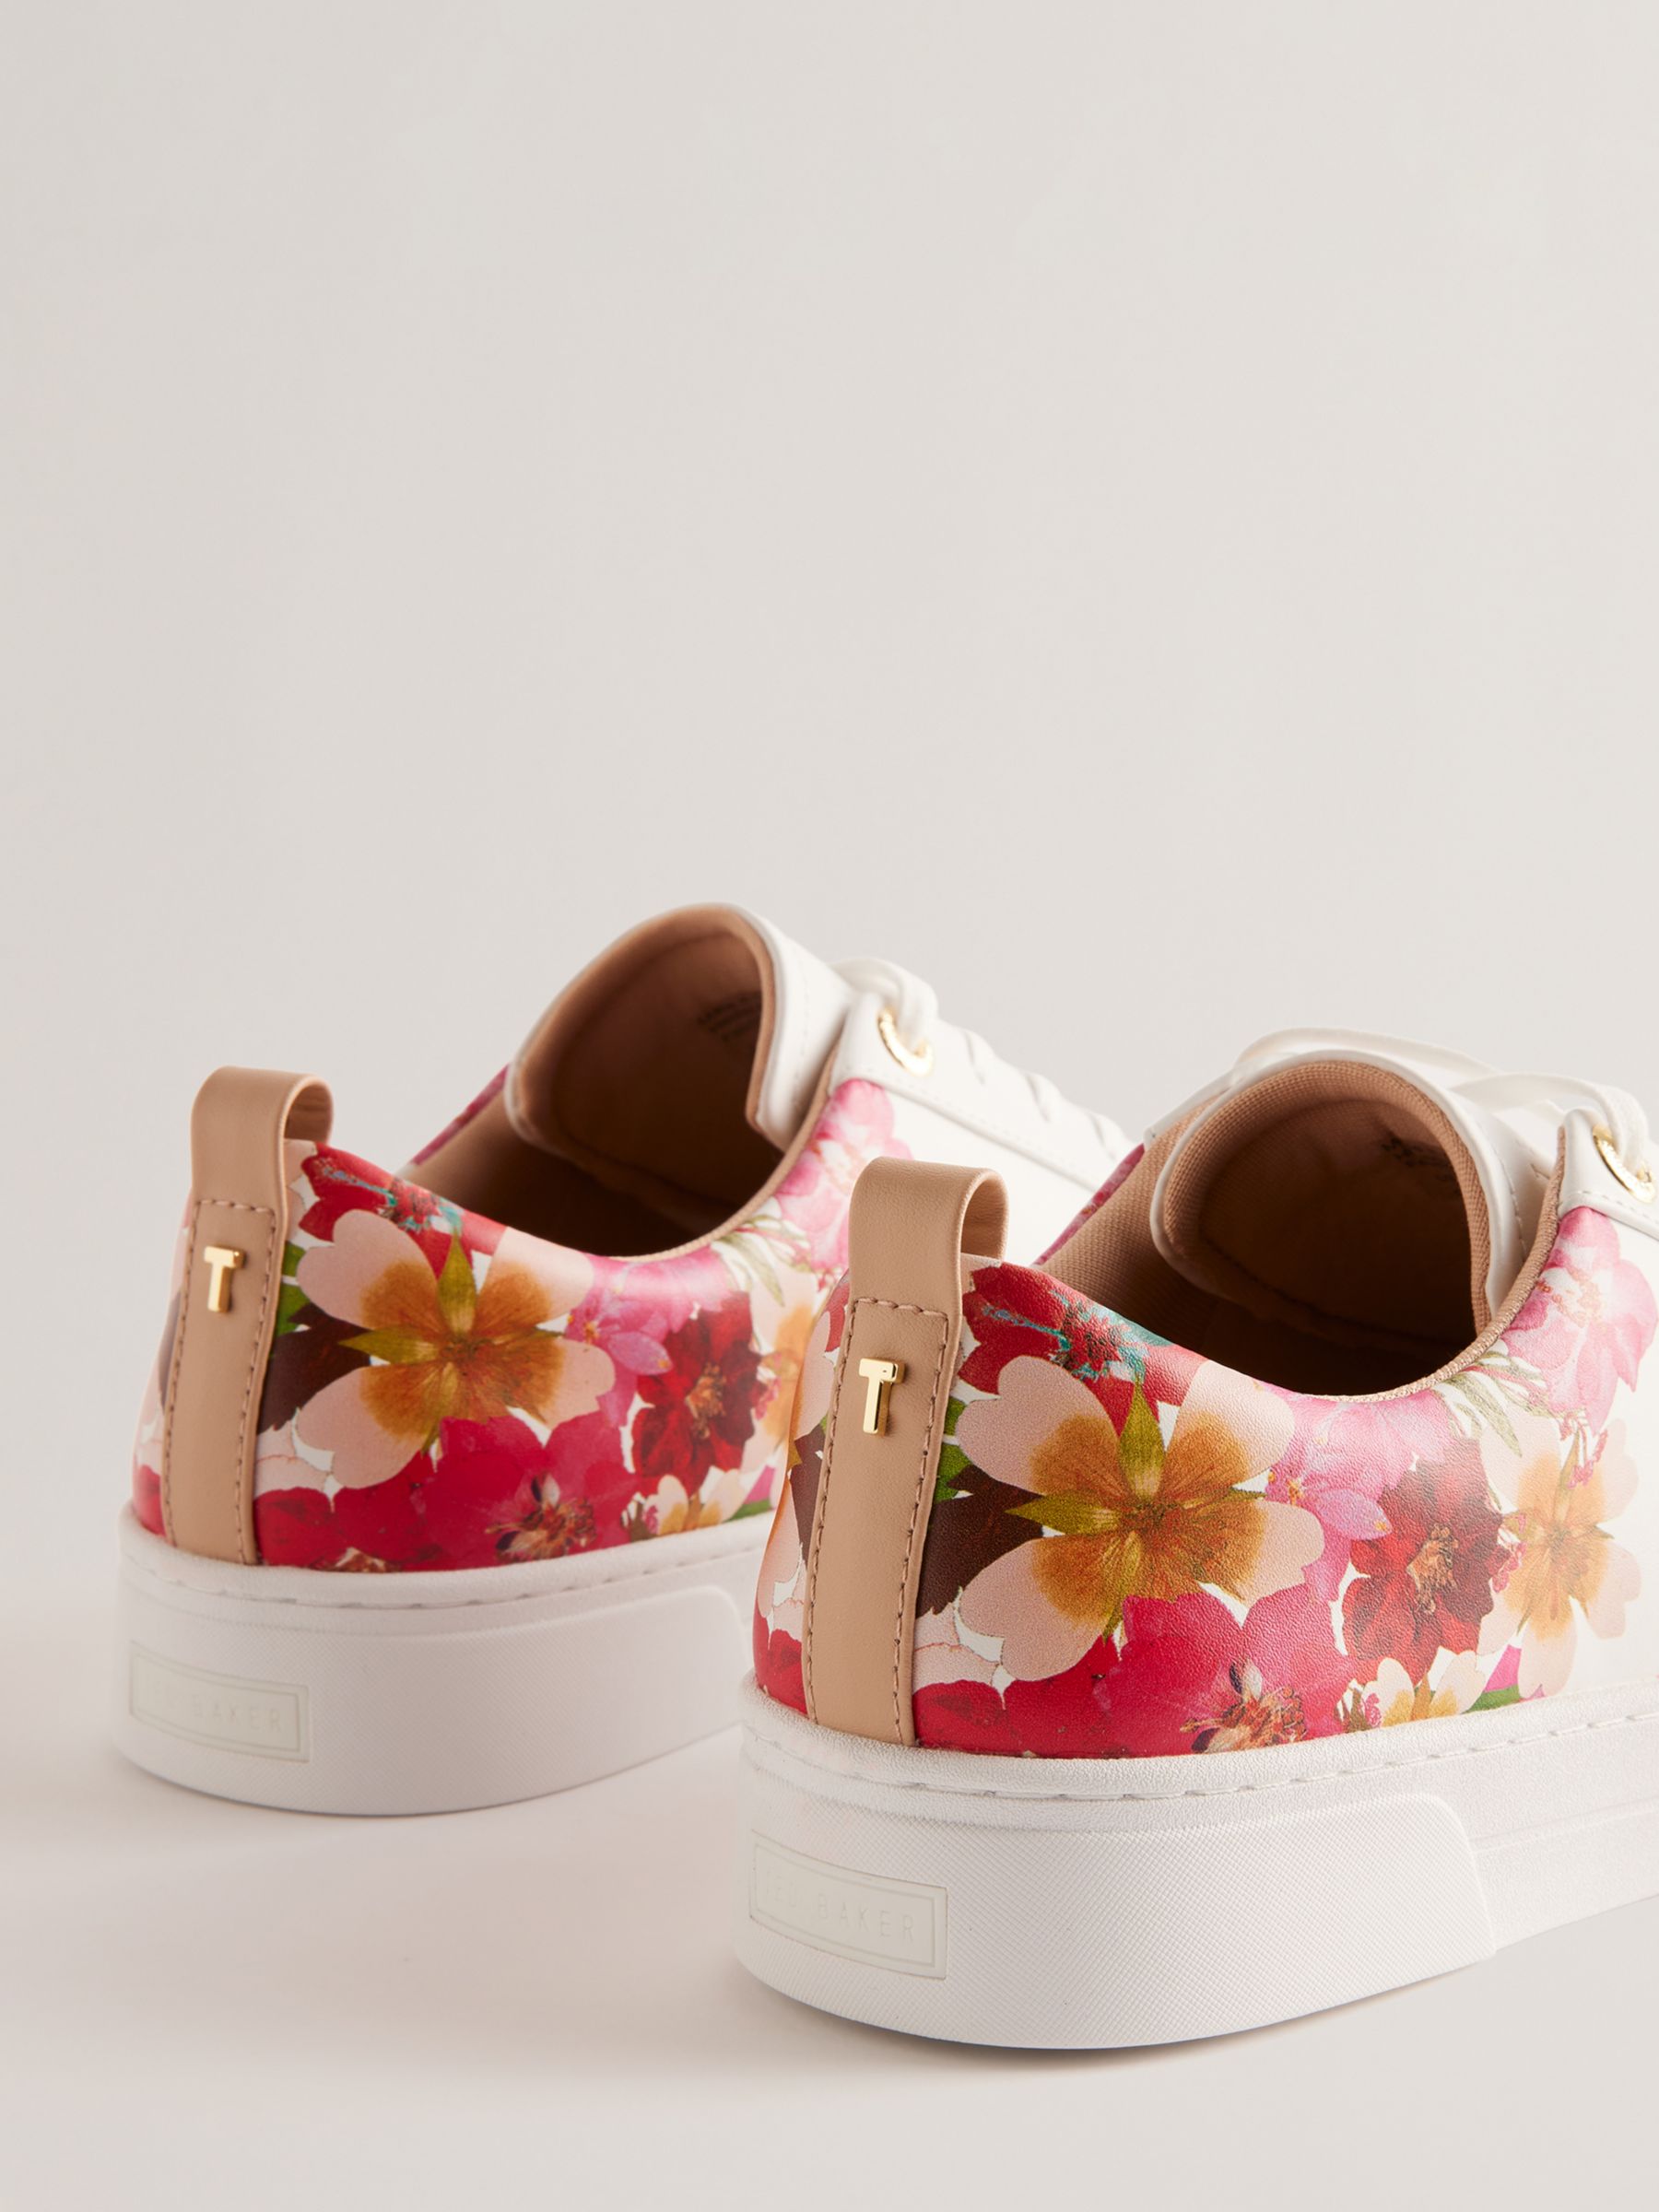 Ted Baker Alissn Floral Leather Cupsole Trainers, White/Multi, EU37